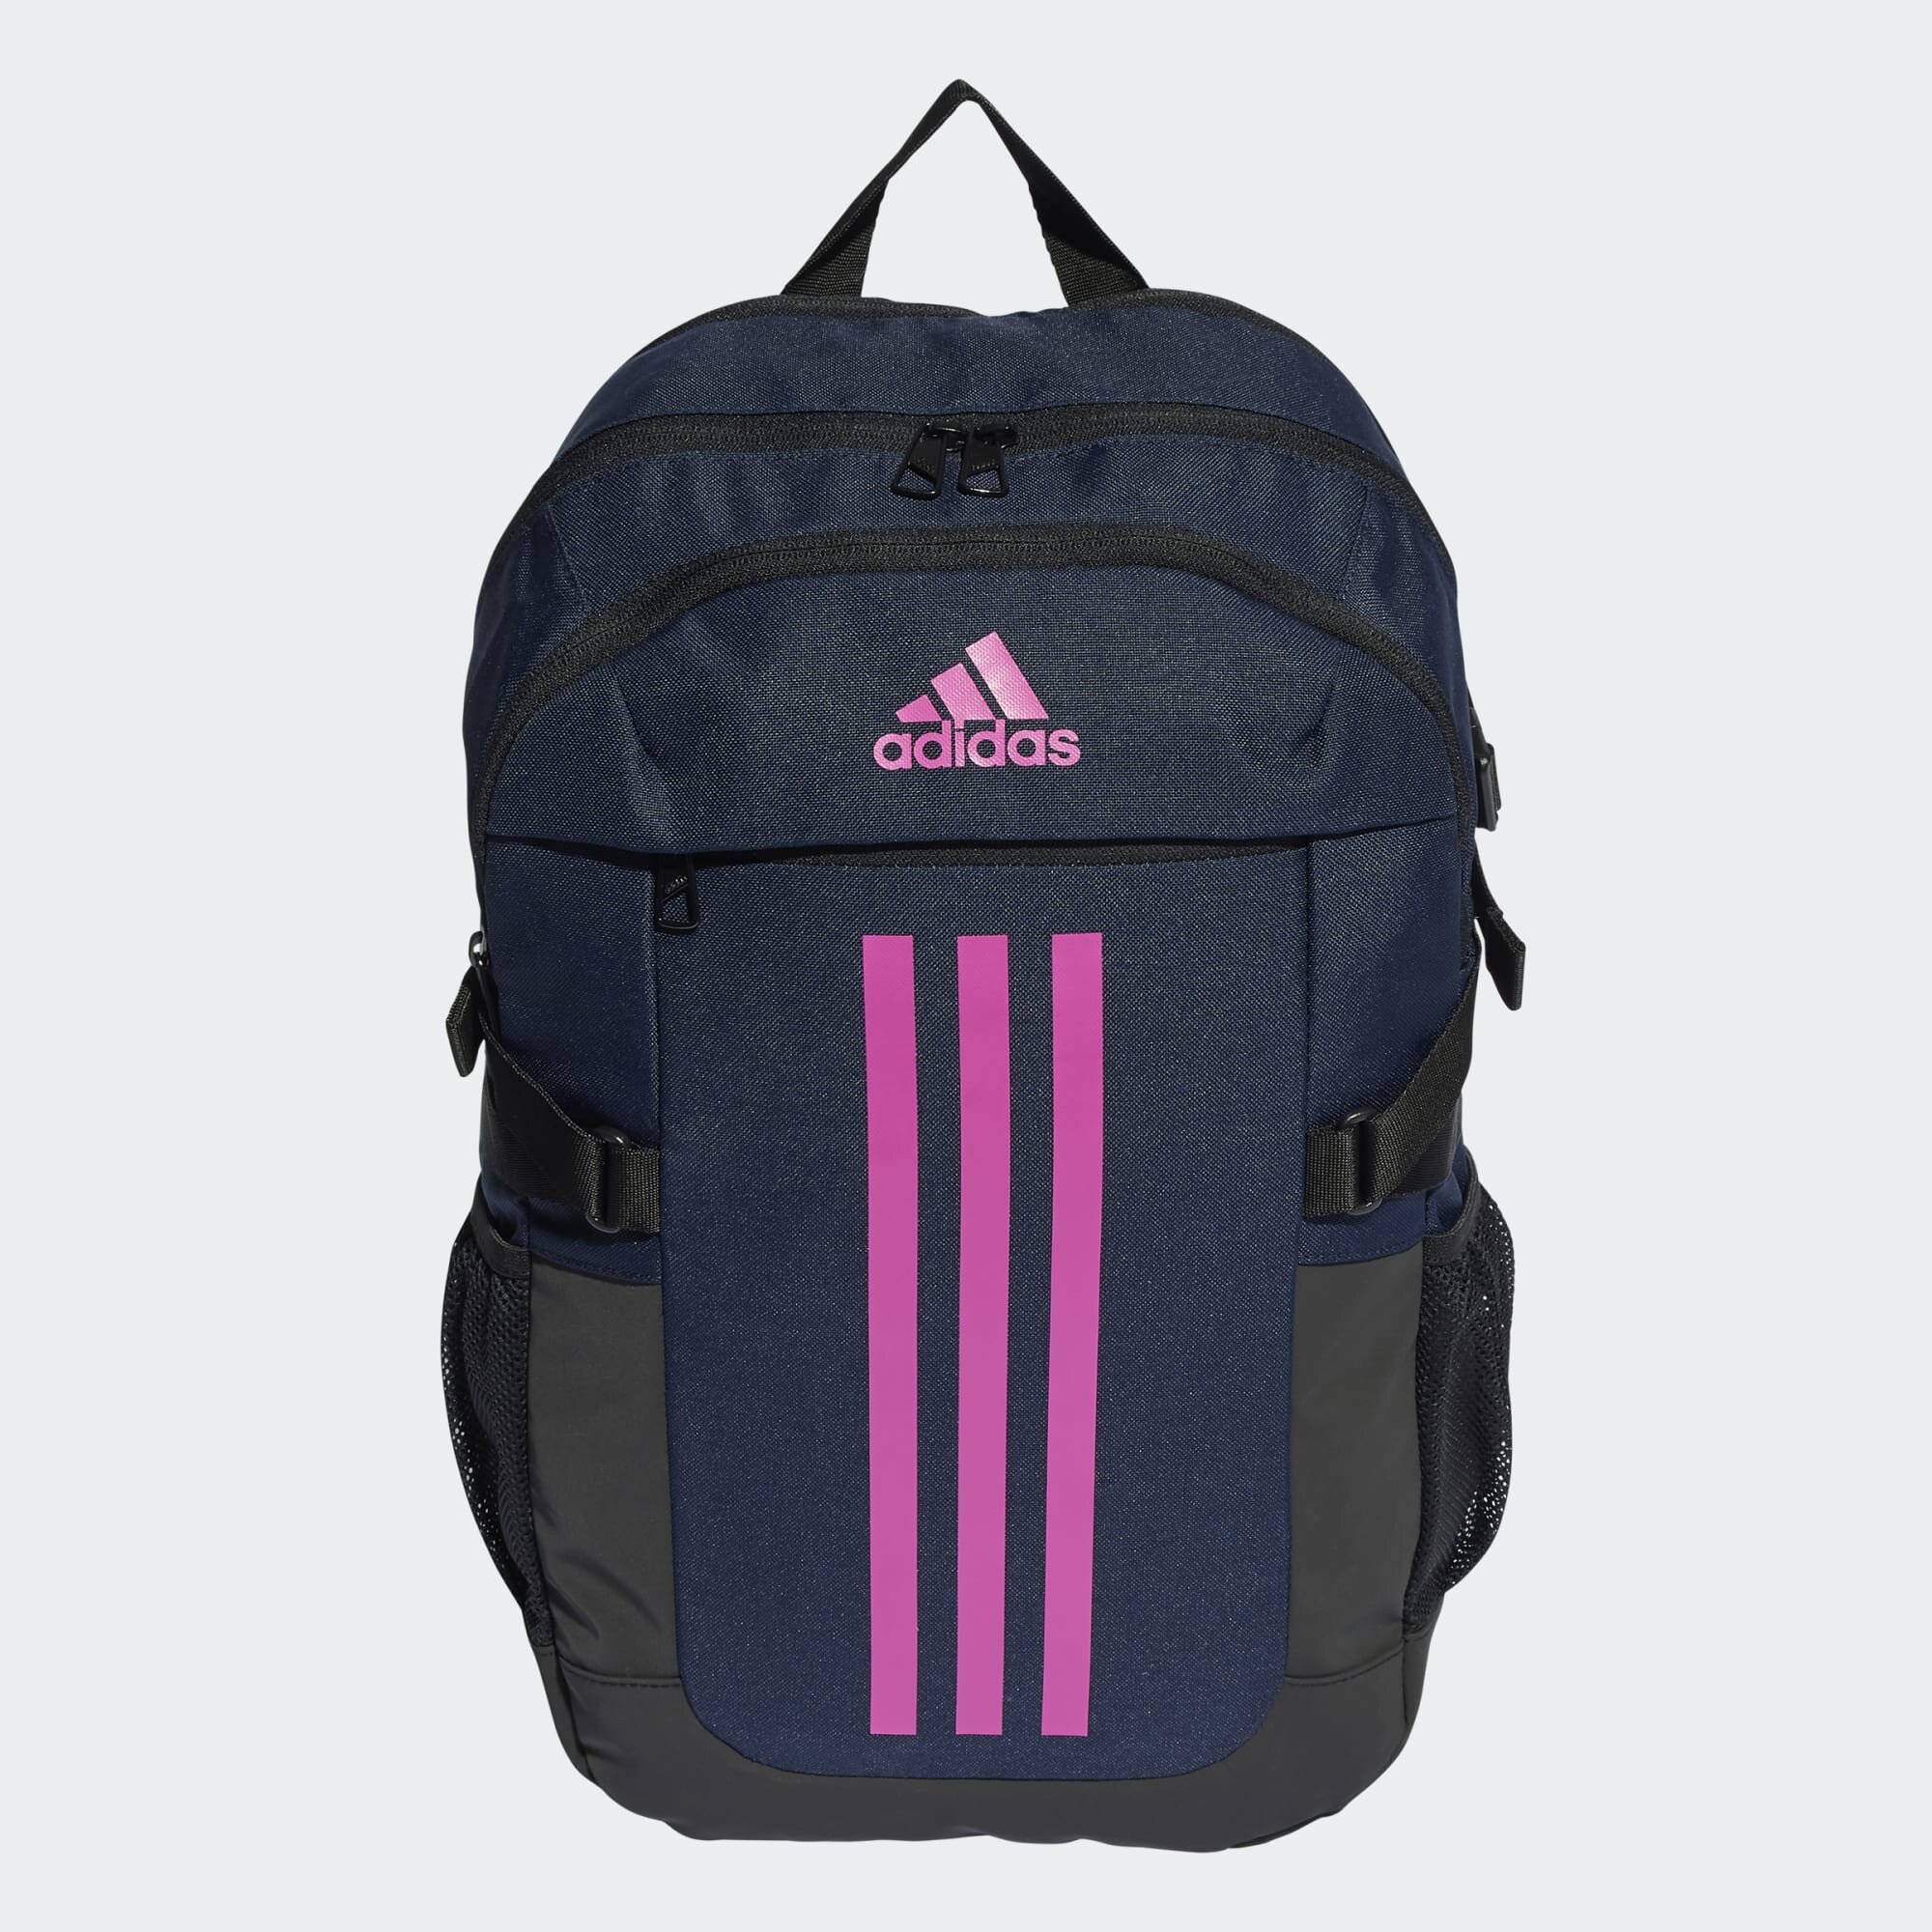 Adidas Power VI Backpack - Buy Online - Ph: 1800-370-766 - AfterPay ...